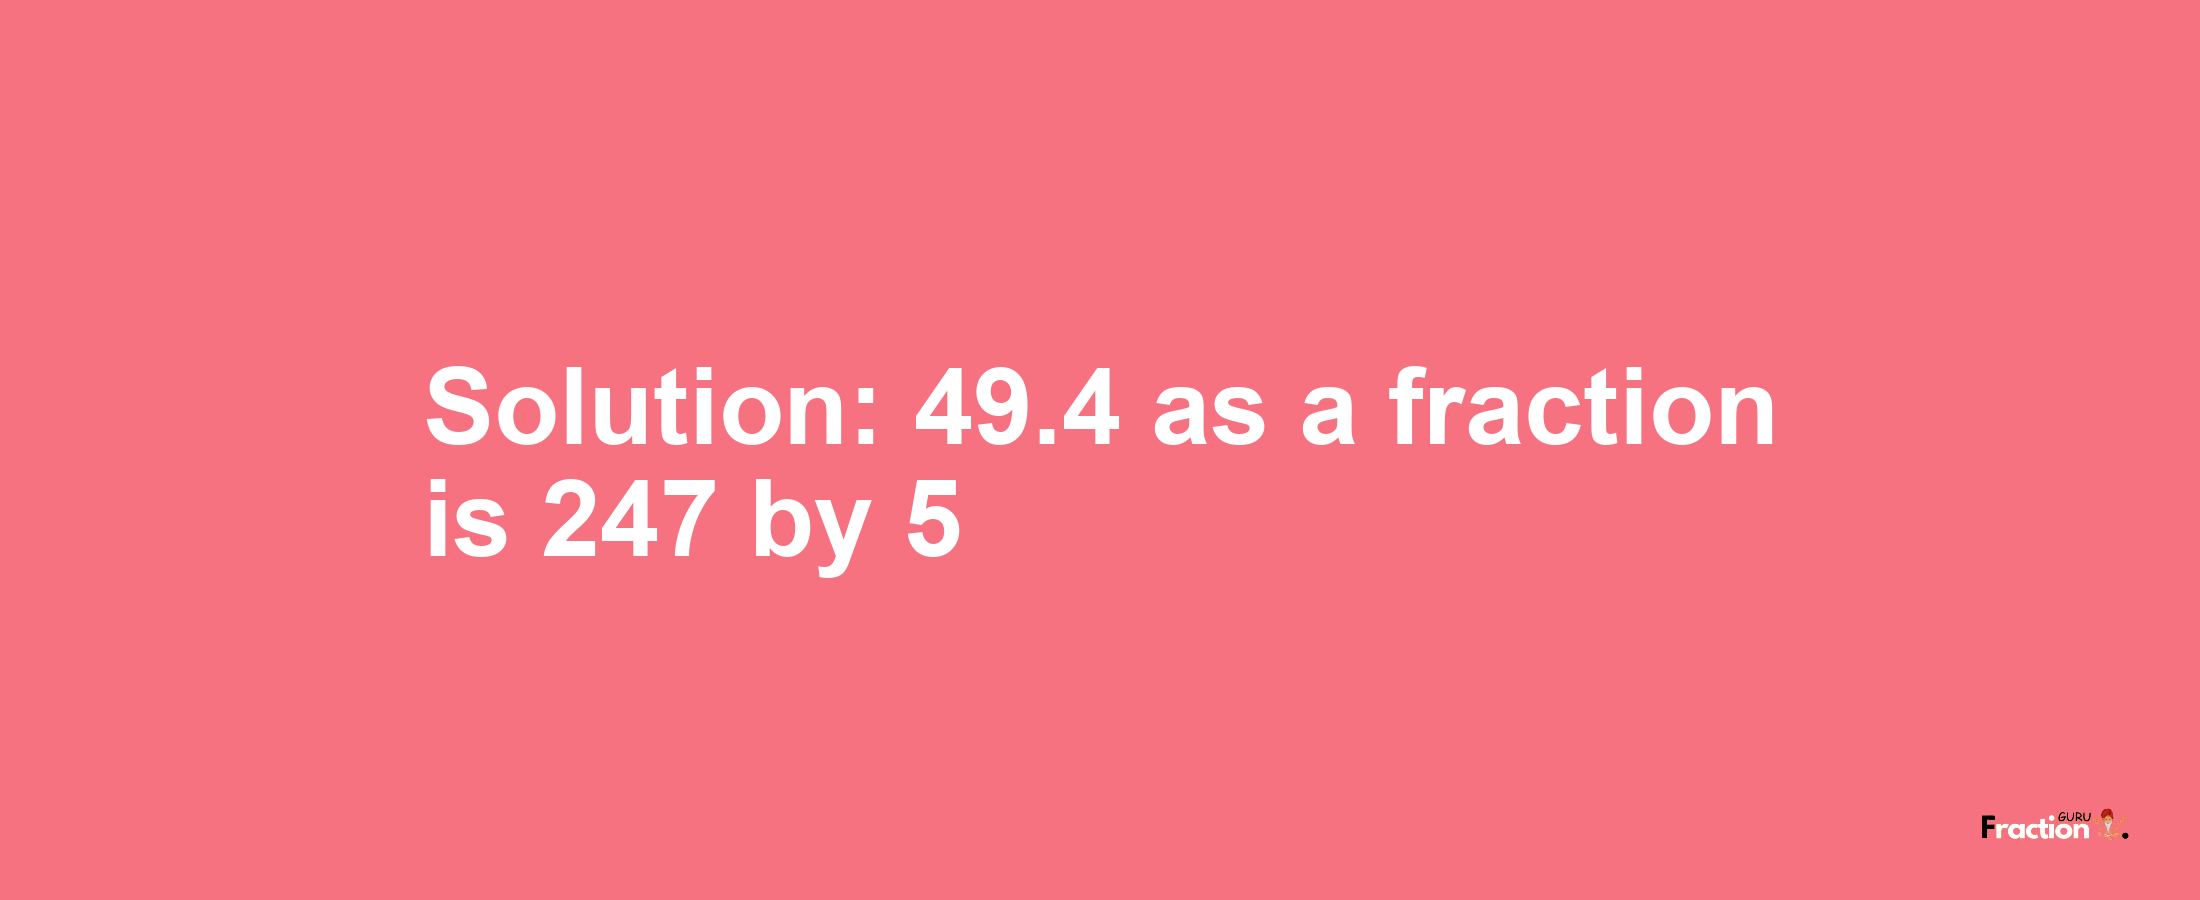 Solution:49.4 as a fraction is 247/5